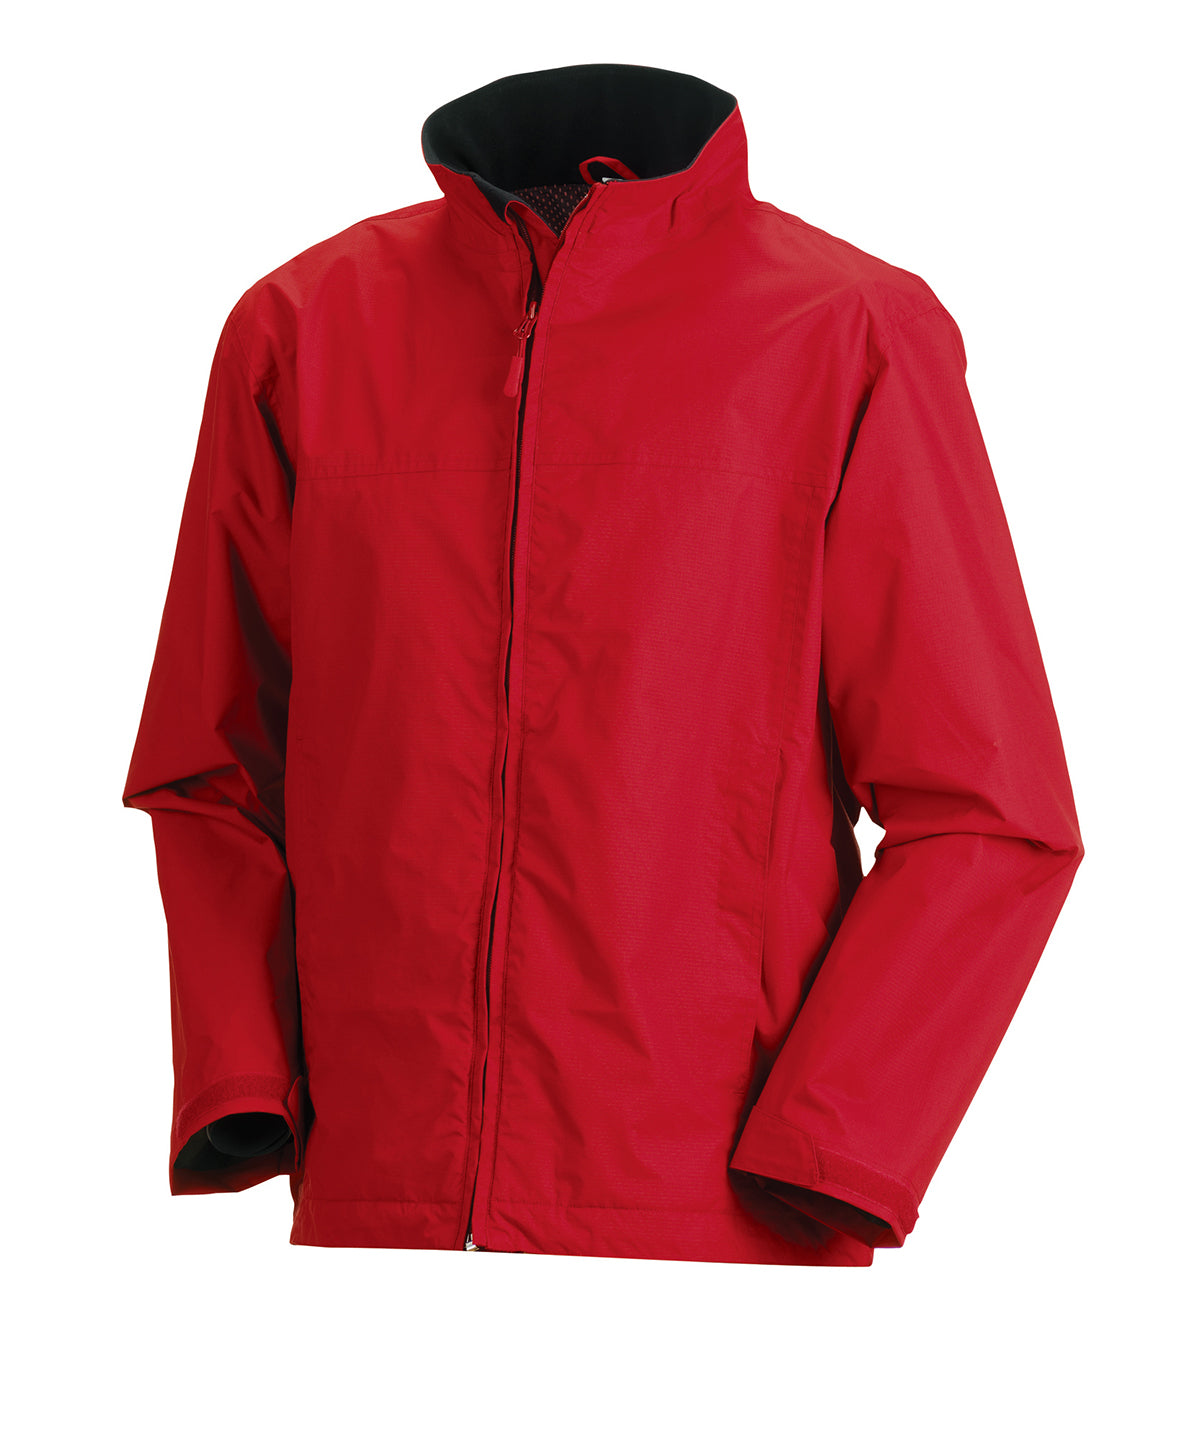 J500M Russell Europe Classic Red Hydra-shell 2000 casual jacket